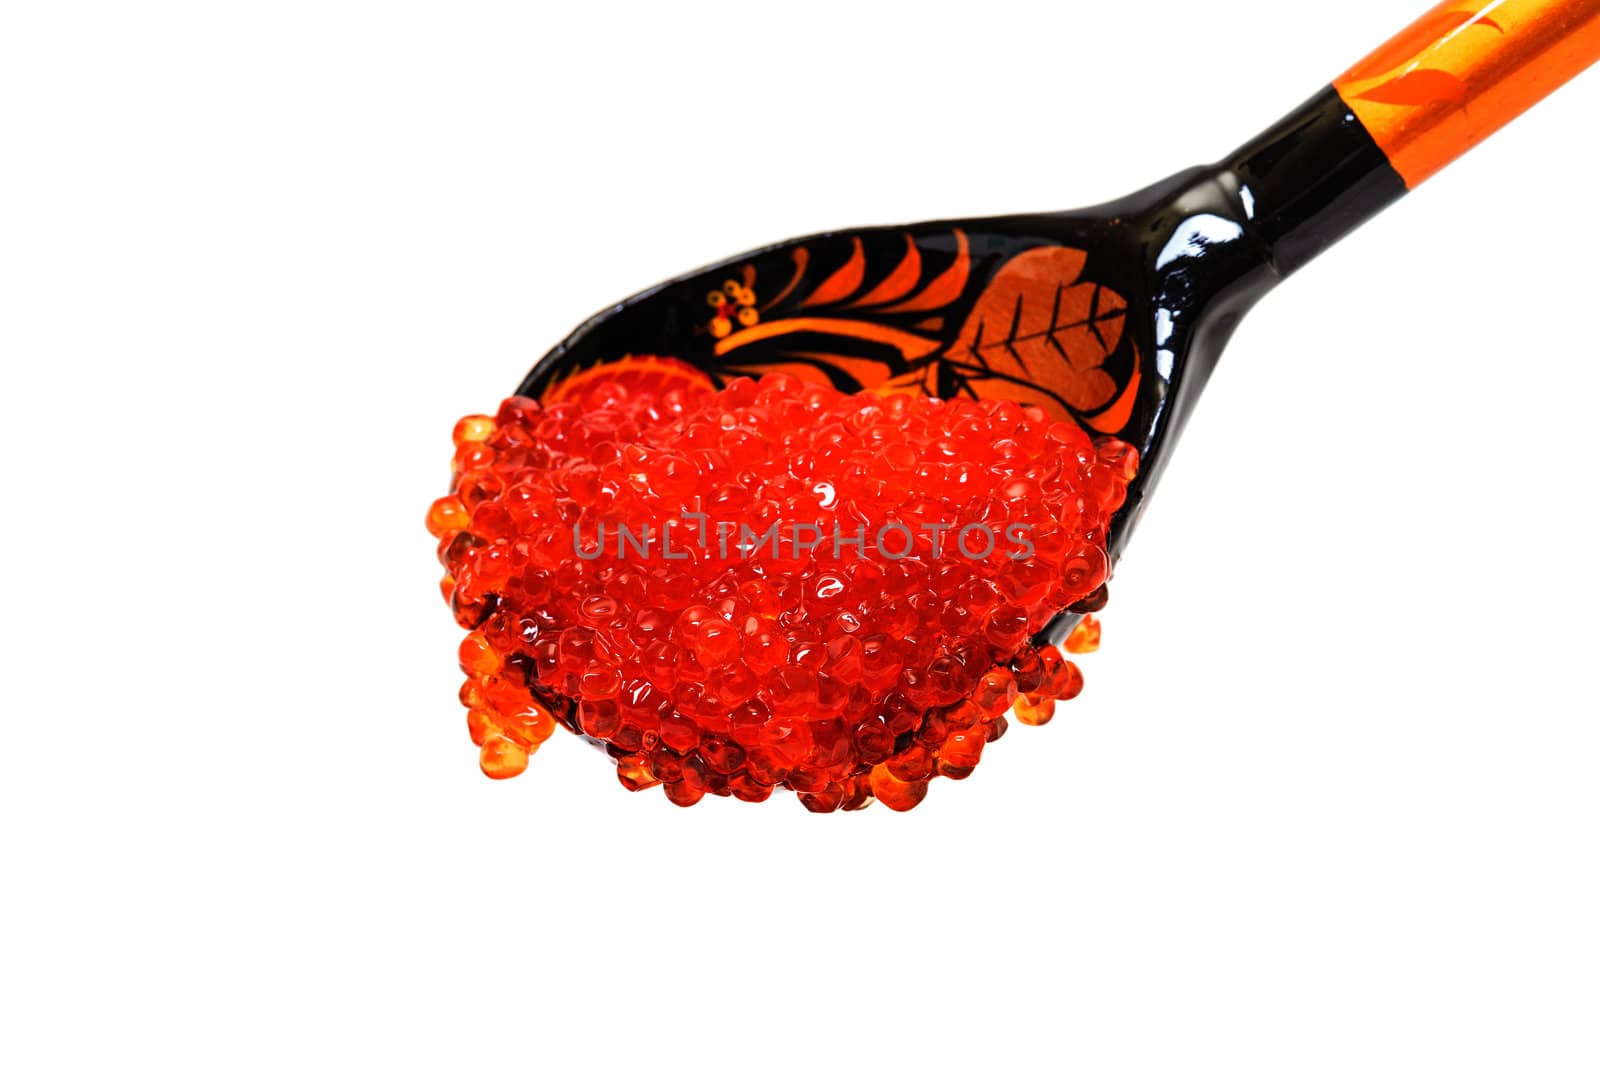 Red salted caviar with wooden spoon on a white background